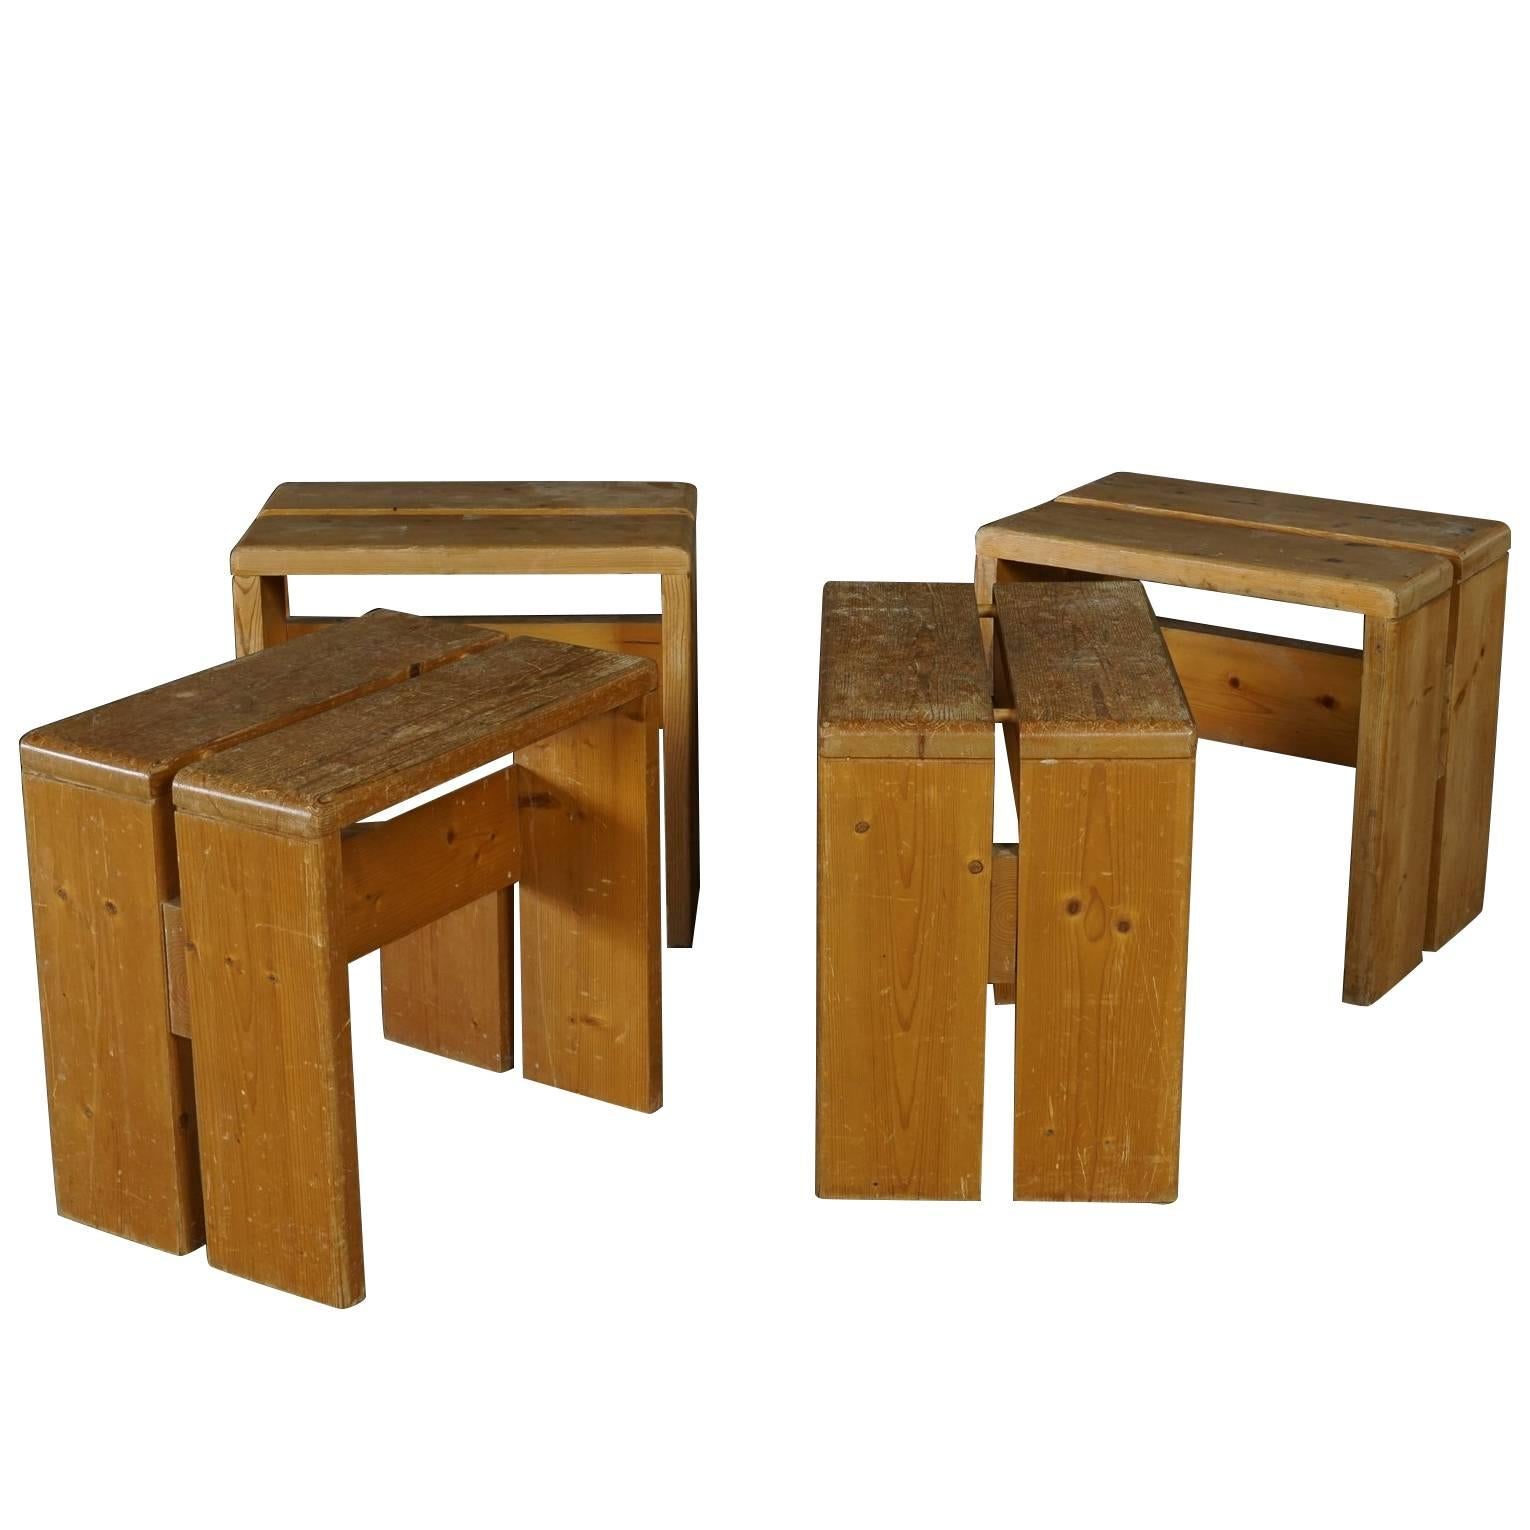 Set of Stools Designed by Charlotte Perriand for Les Arcs, France, circa 1960